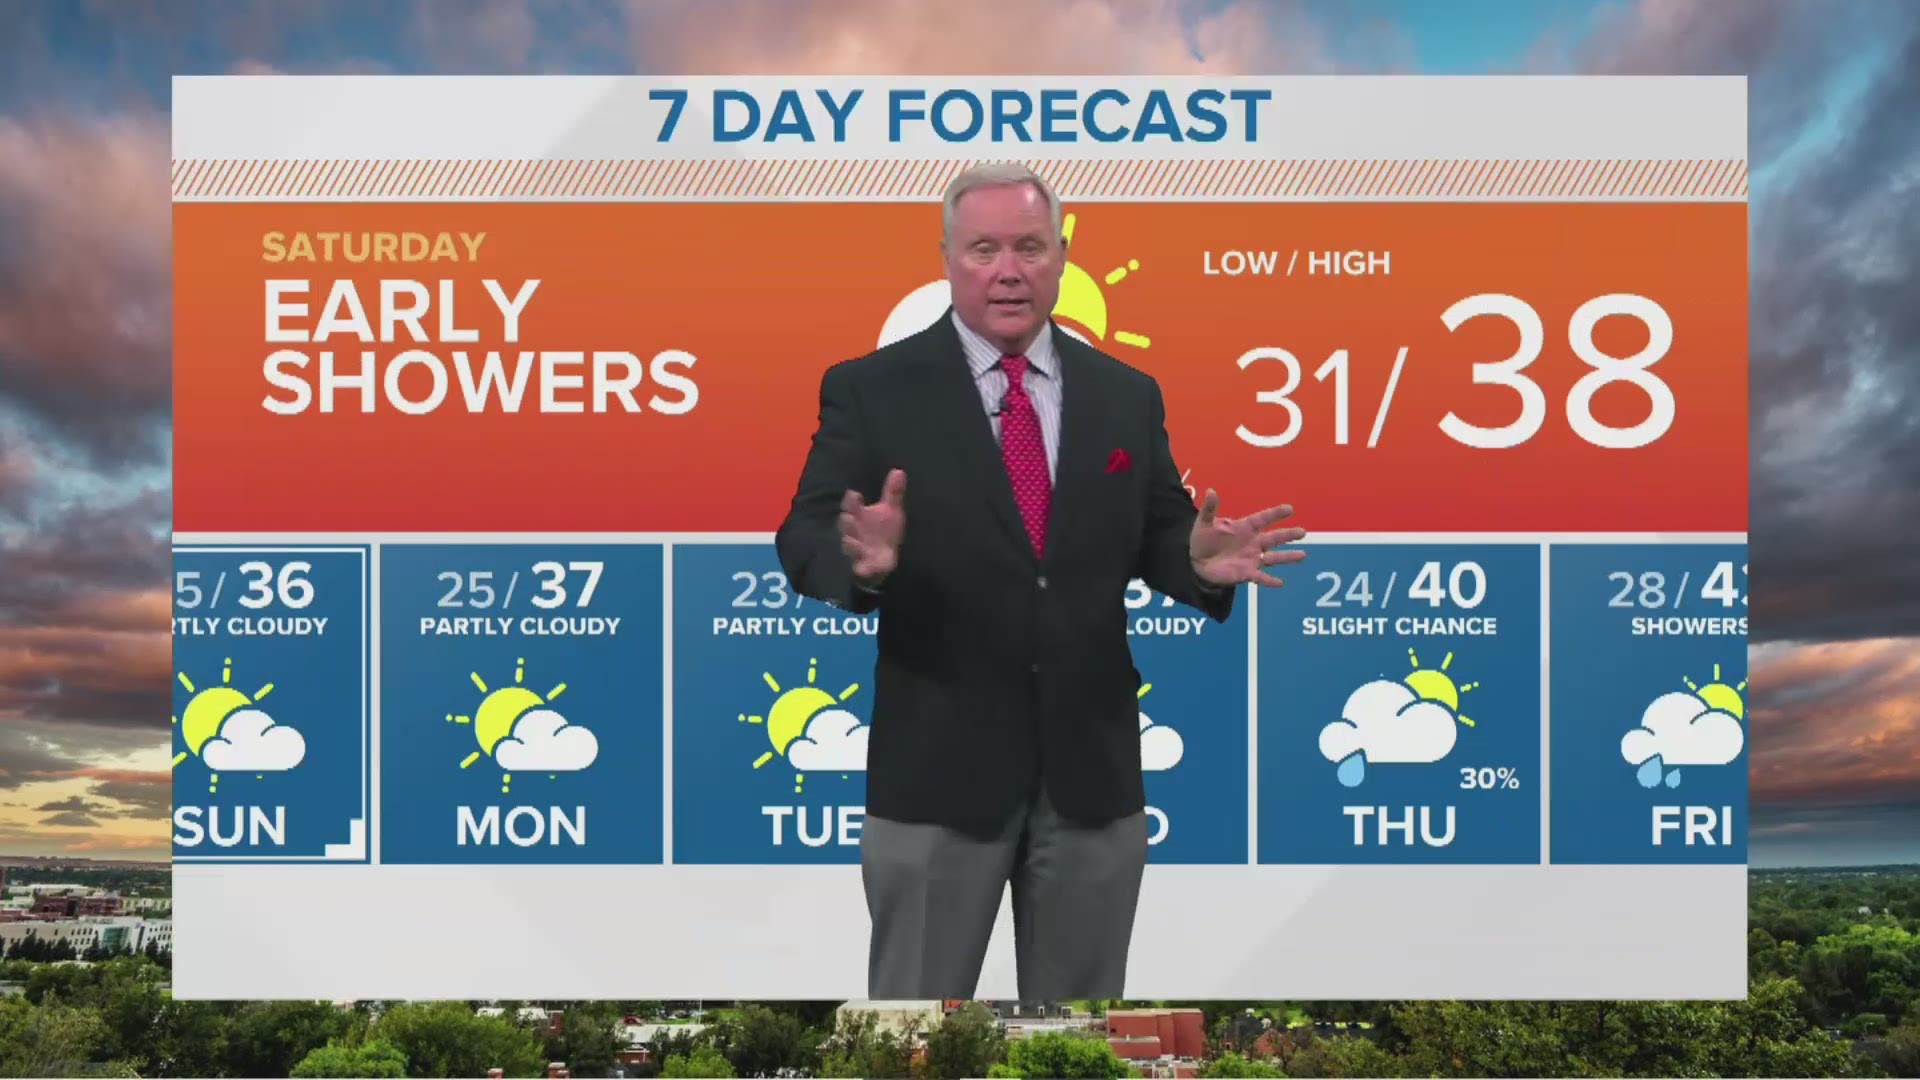 Rick Lantz says there is a chance of showers Saturday morning with highs only in the mid to upper 30s.